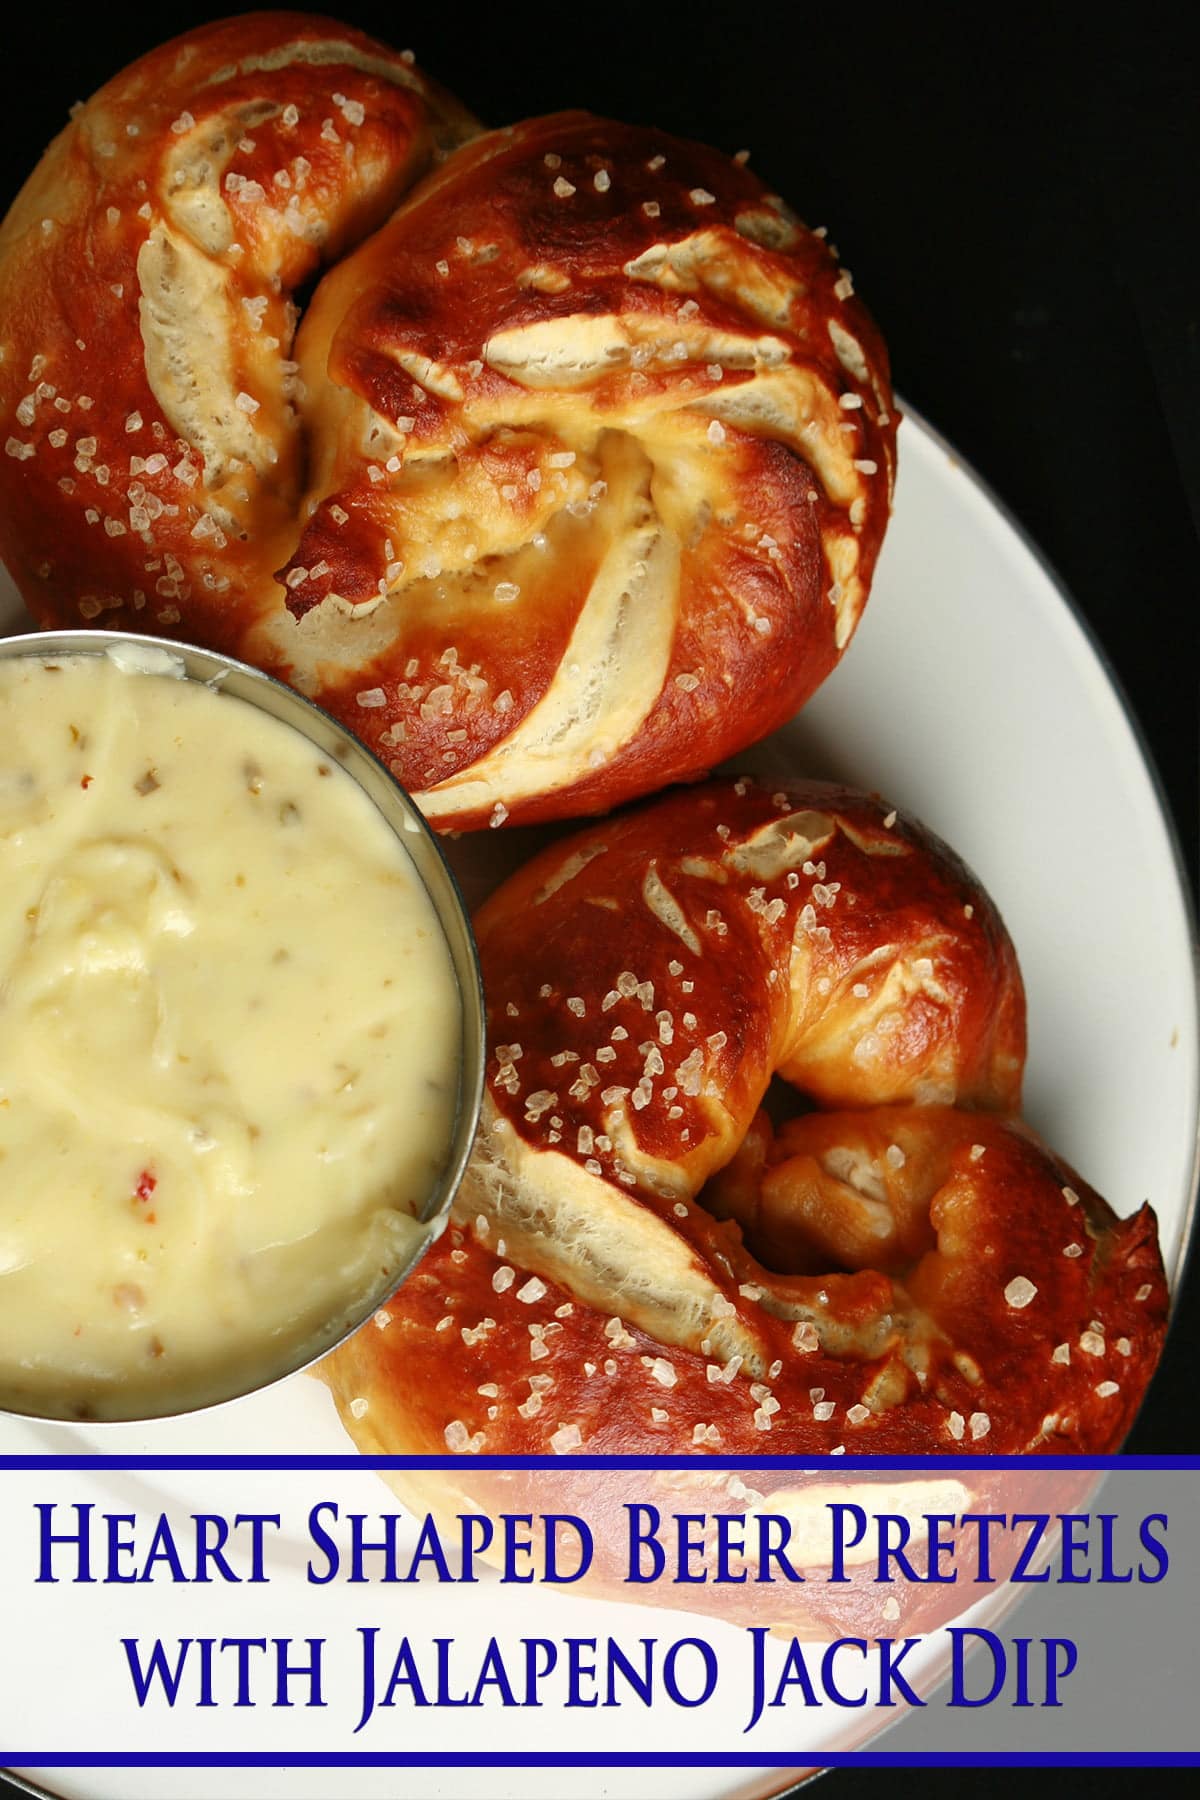 Close up photo of 2 heart shaped pretzels and a small bowl of cheese dip. It is labeled with "Heart Shaped Beer Pretzels with Jalapeno Jack Dip" in blue writing.